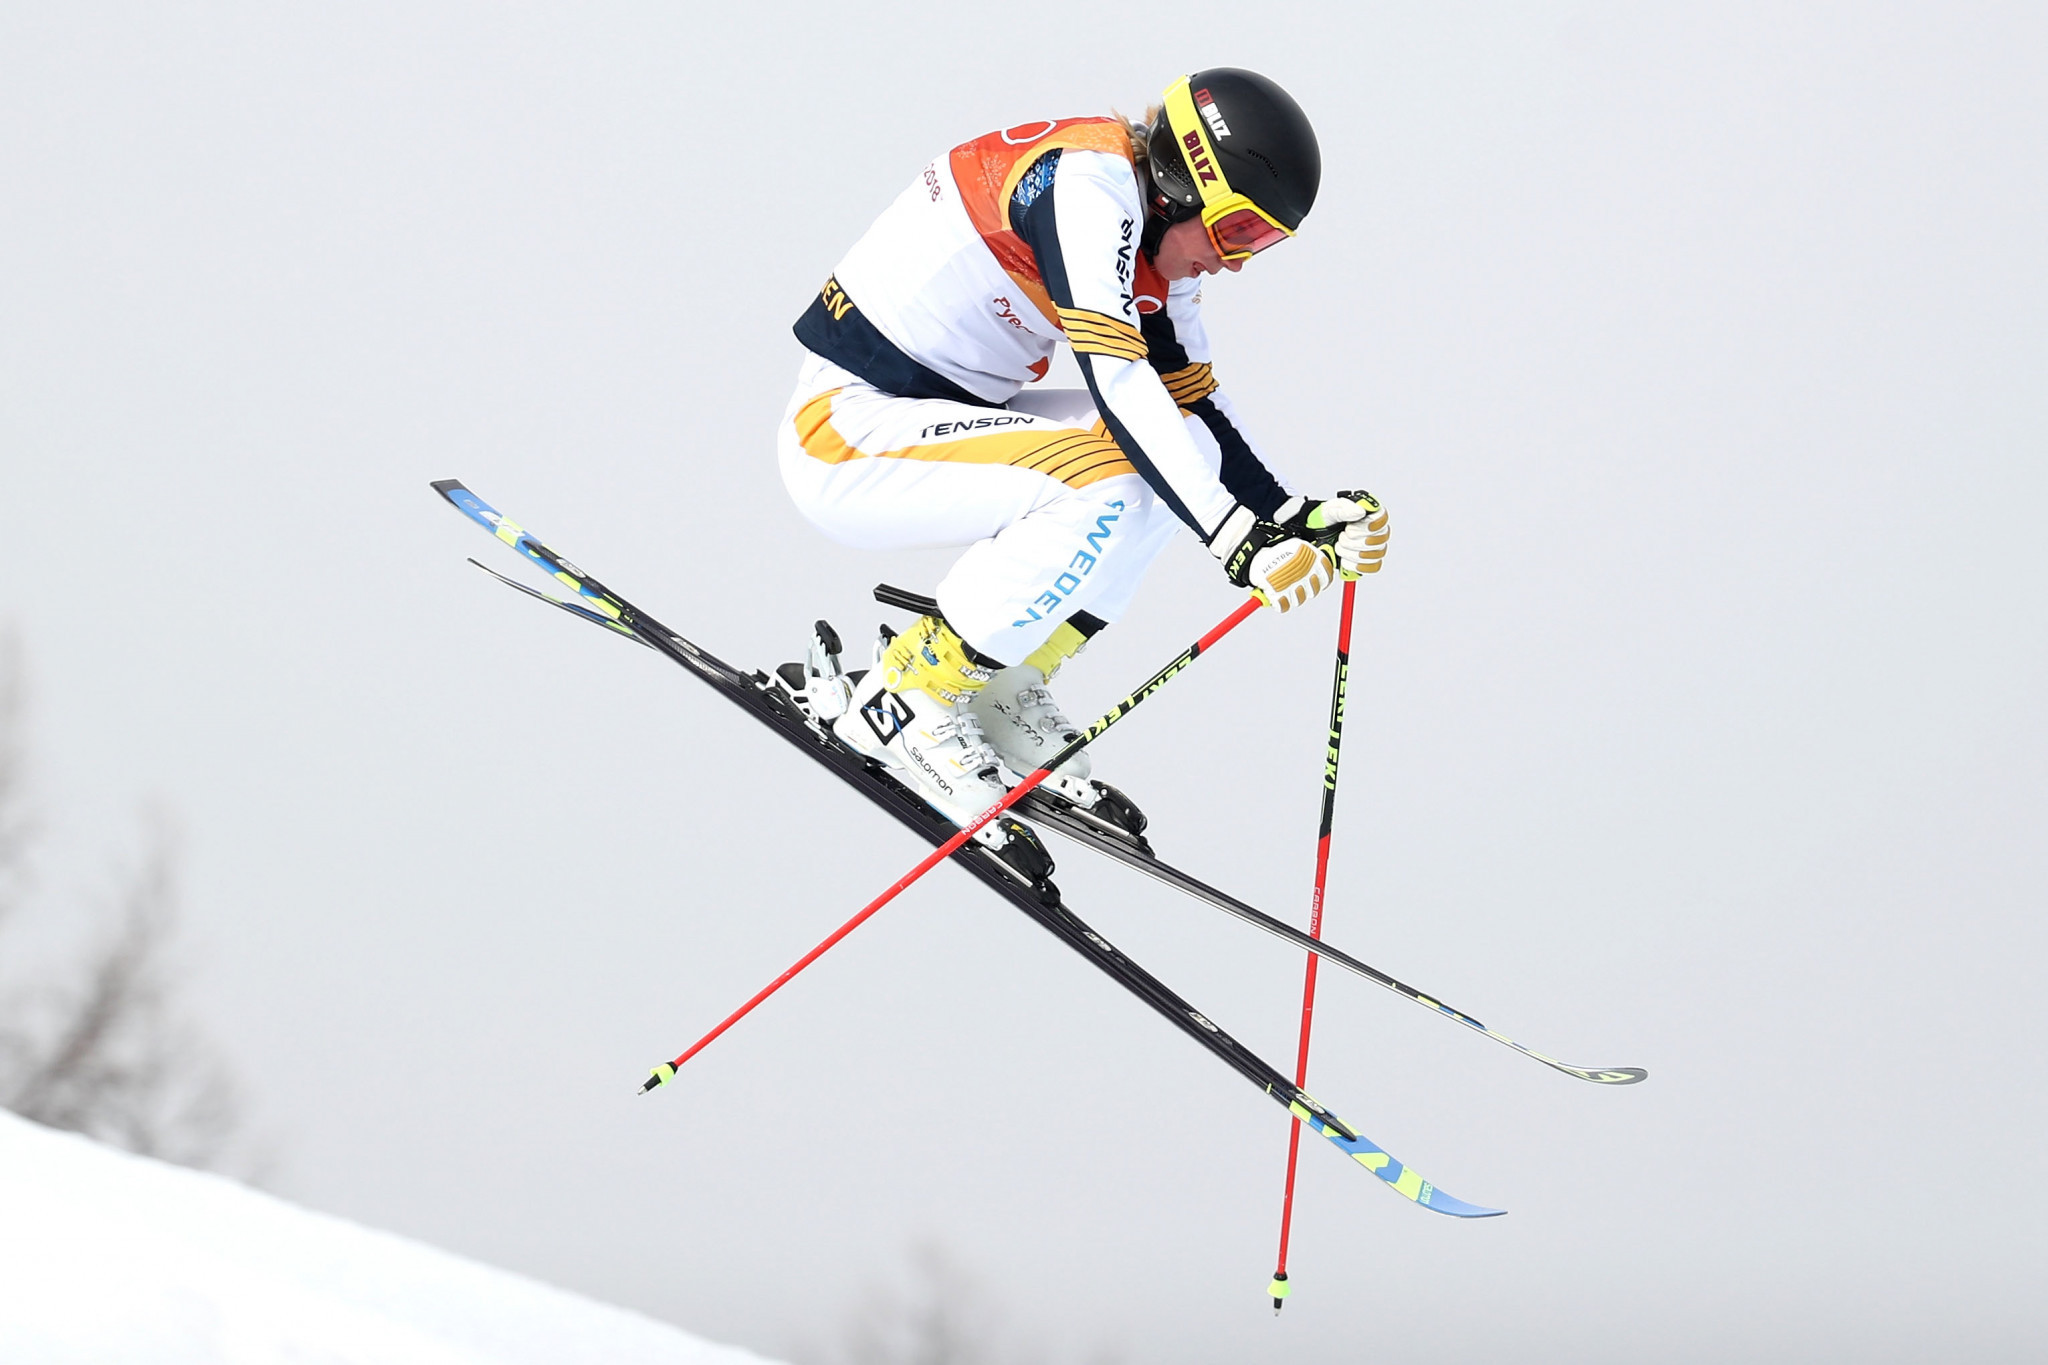 Näslund looking to get back on track as Ski Cross World Cup restarts